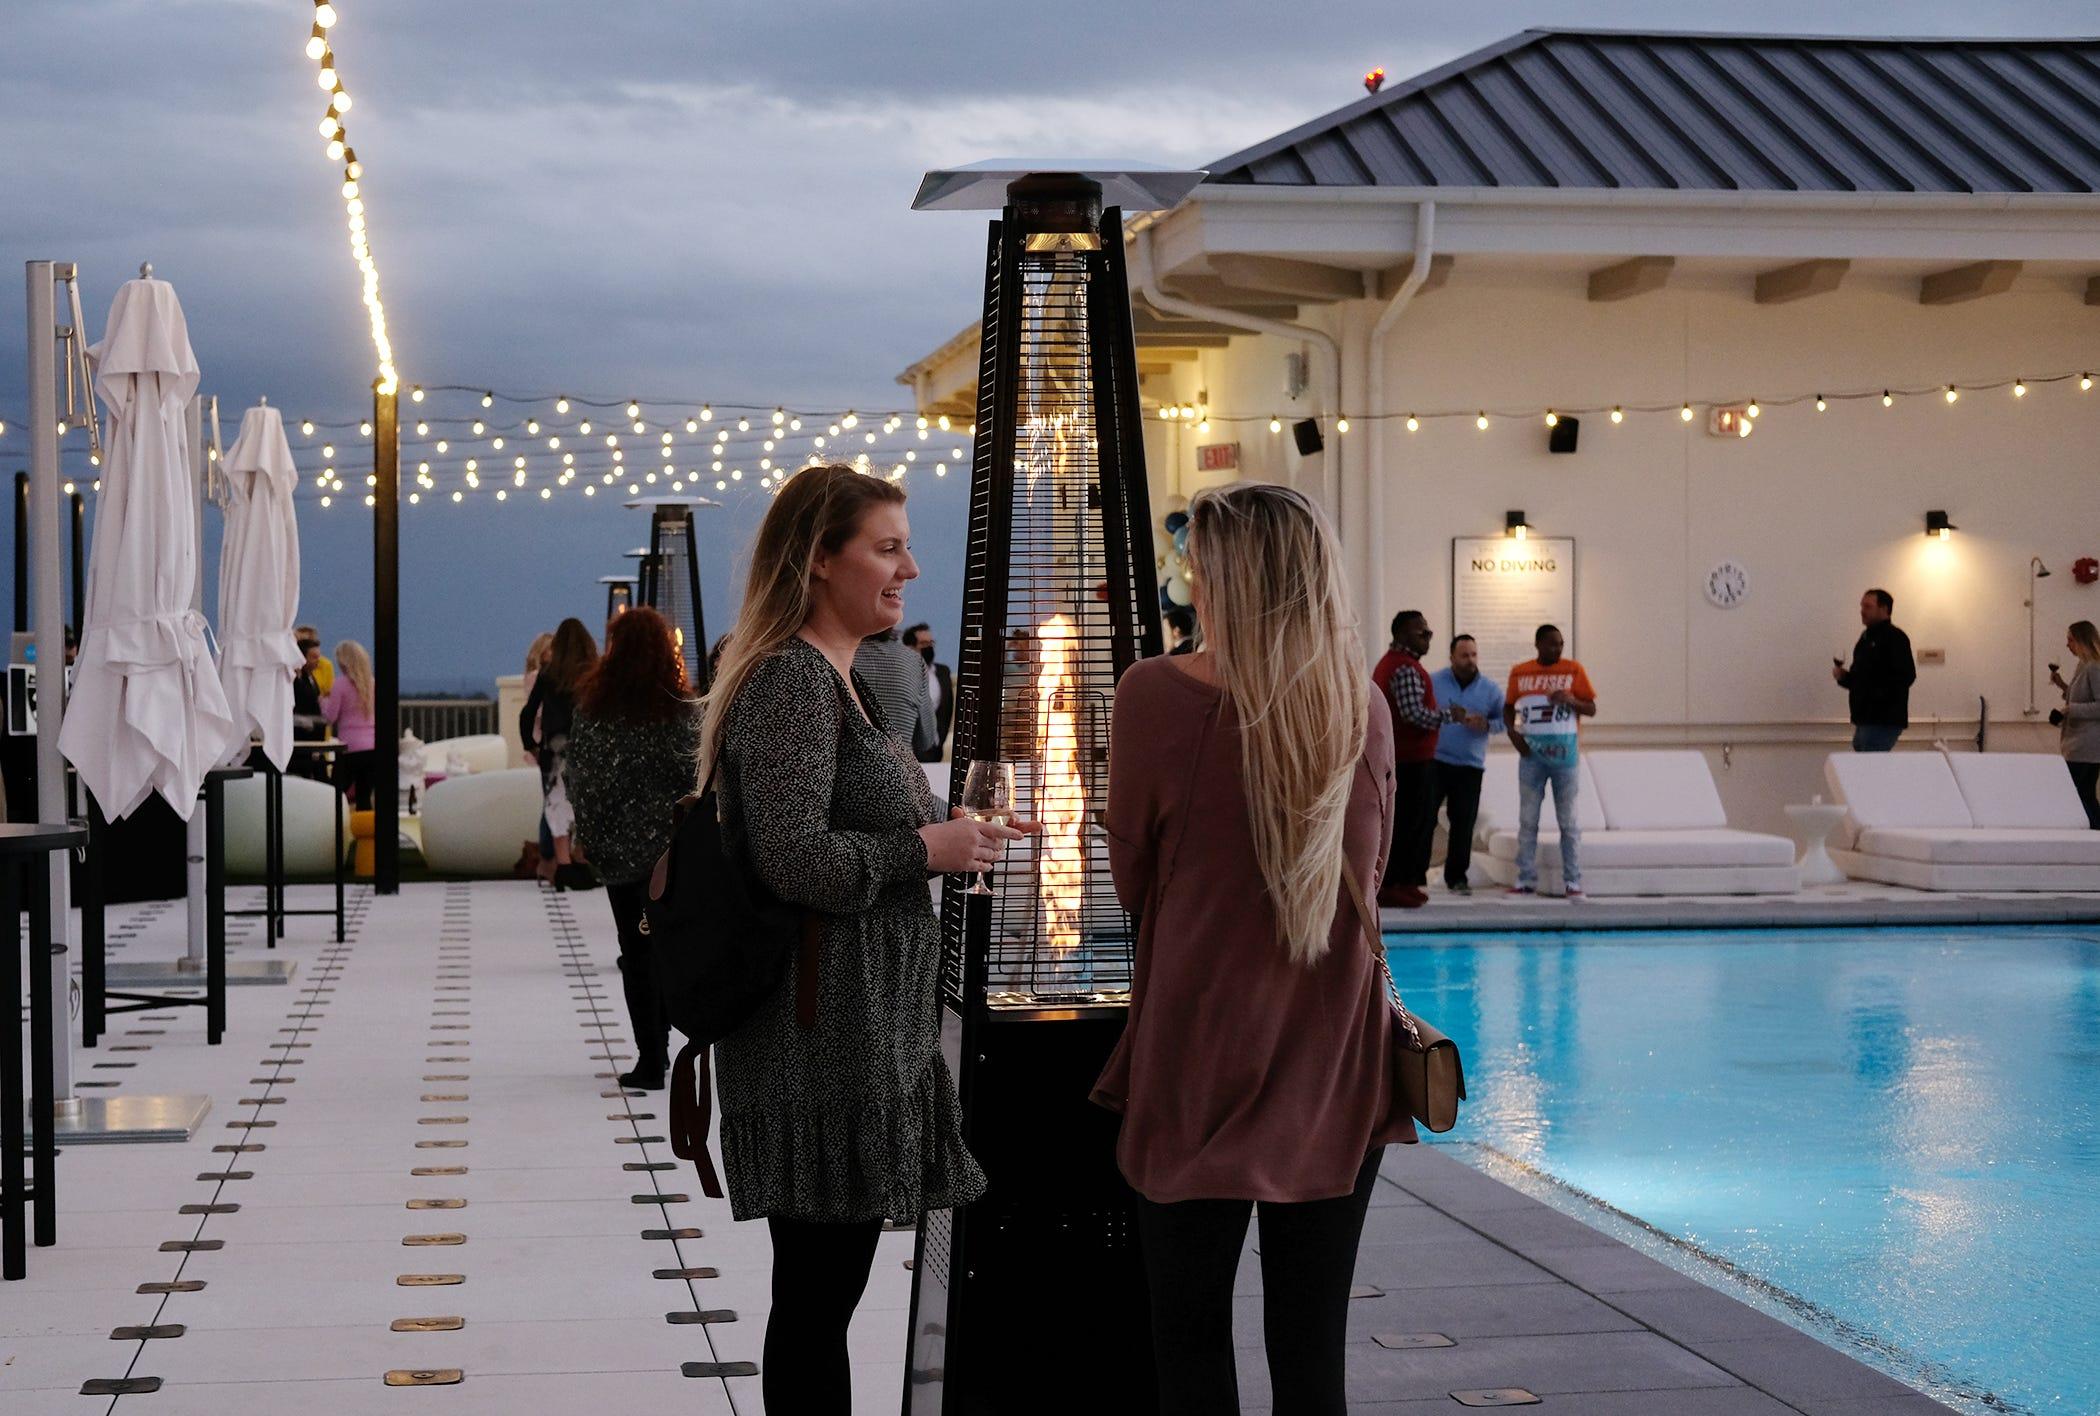 Guests enjoy the ambiance of the rooftop pool and bar during the public grand opening for Hotel Effie next to The Village of Baytowne Wharf.